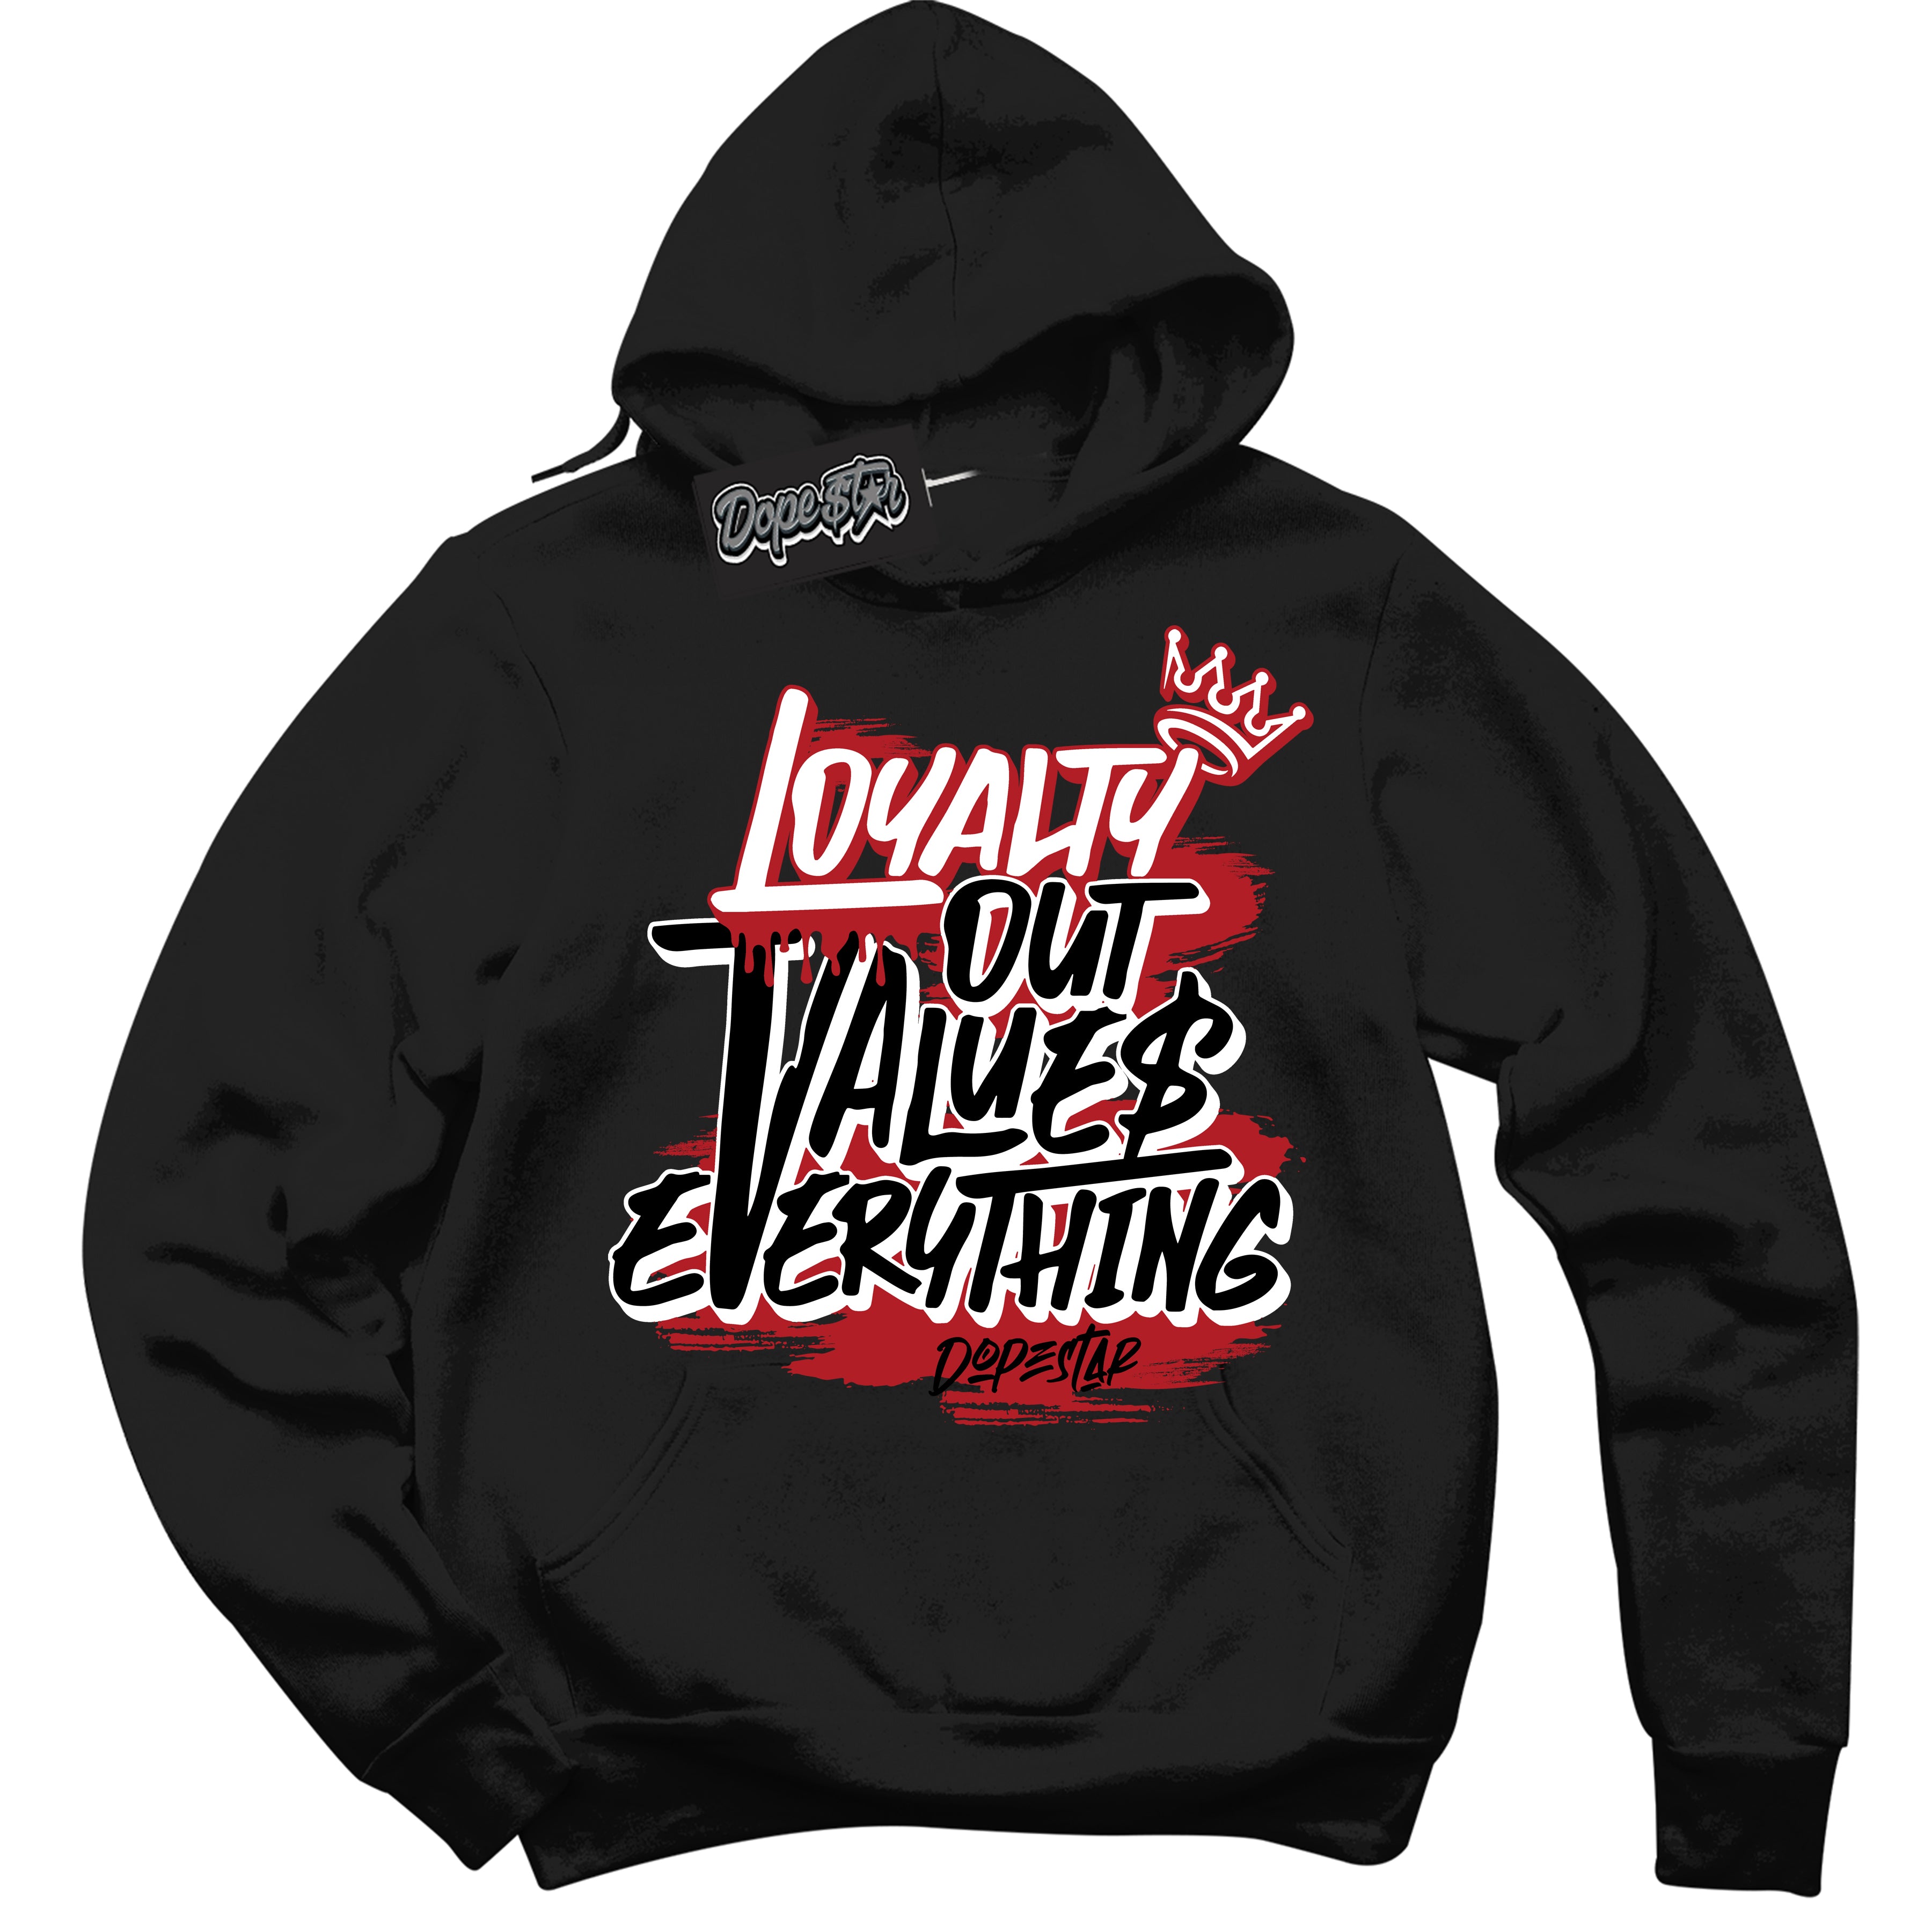 Cool Black Hoodie with “ Loyalty Out Values Everything ”  design that Perfectly Matches  Alternate Bred Toe 1s Sneakers.